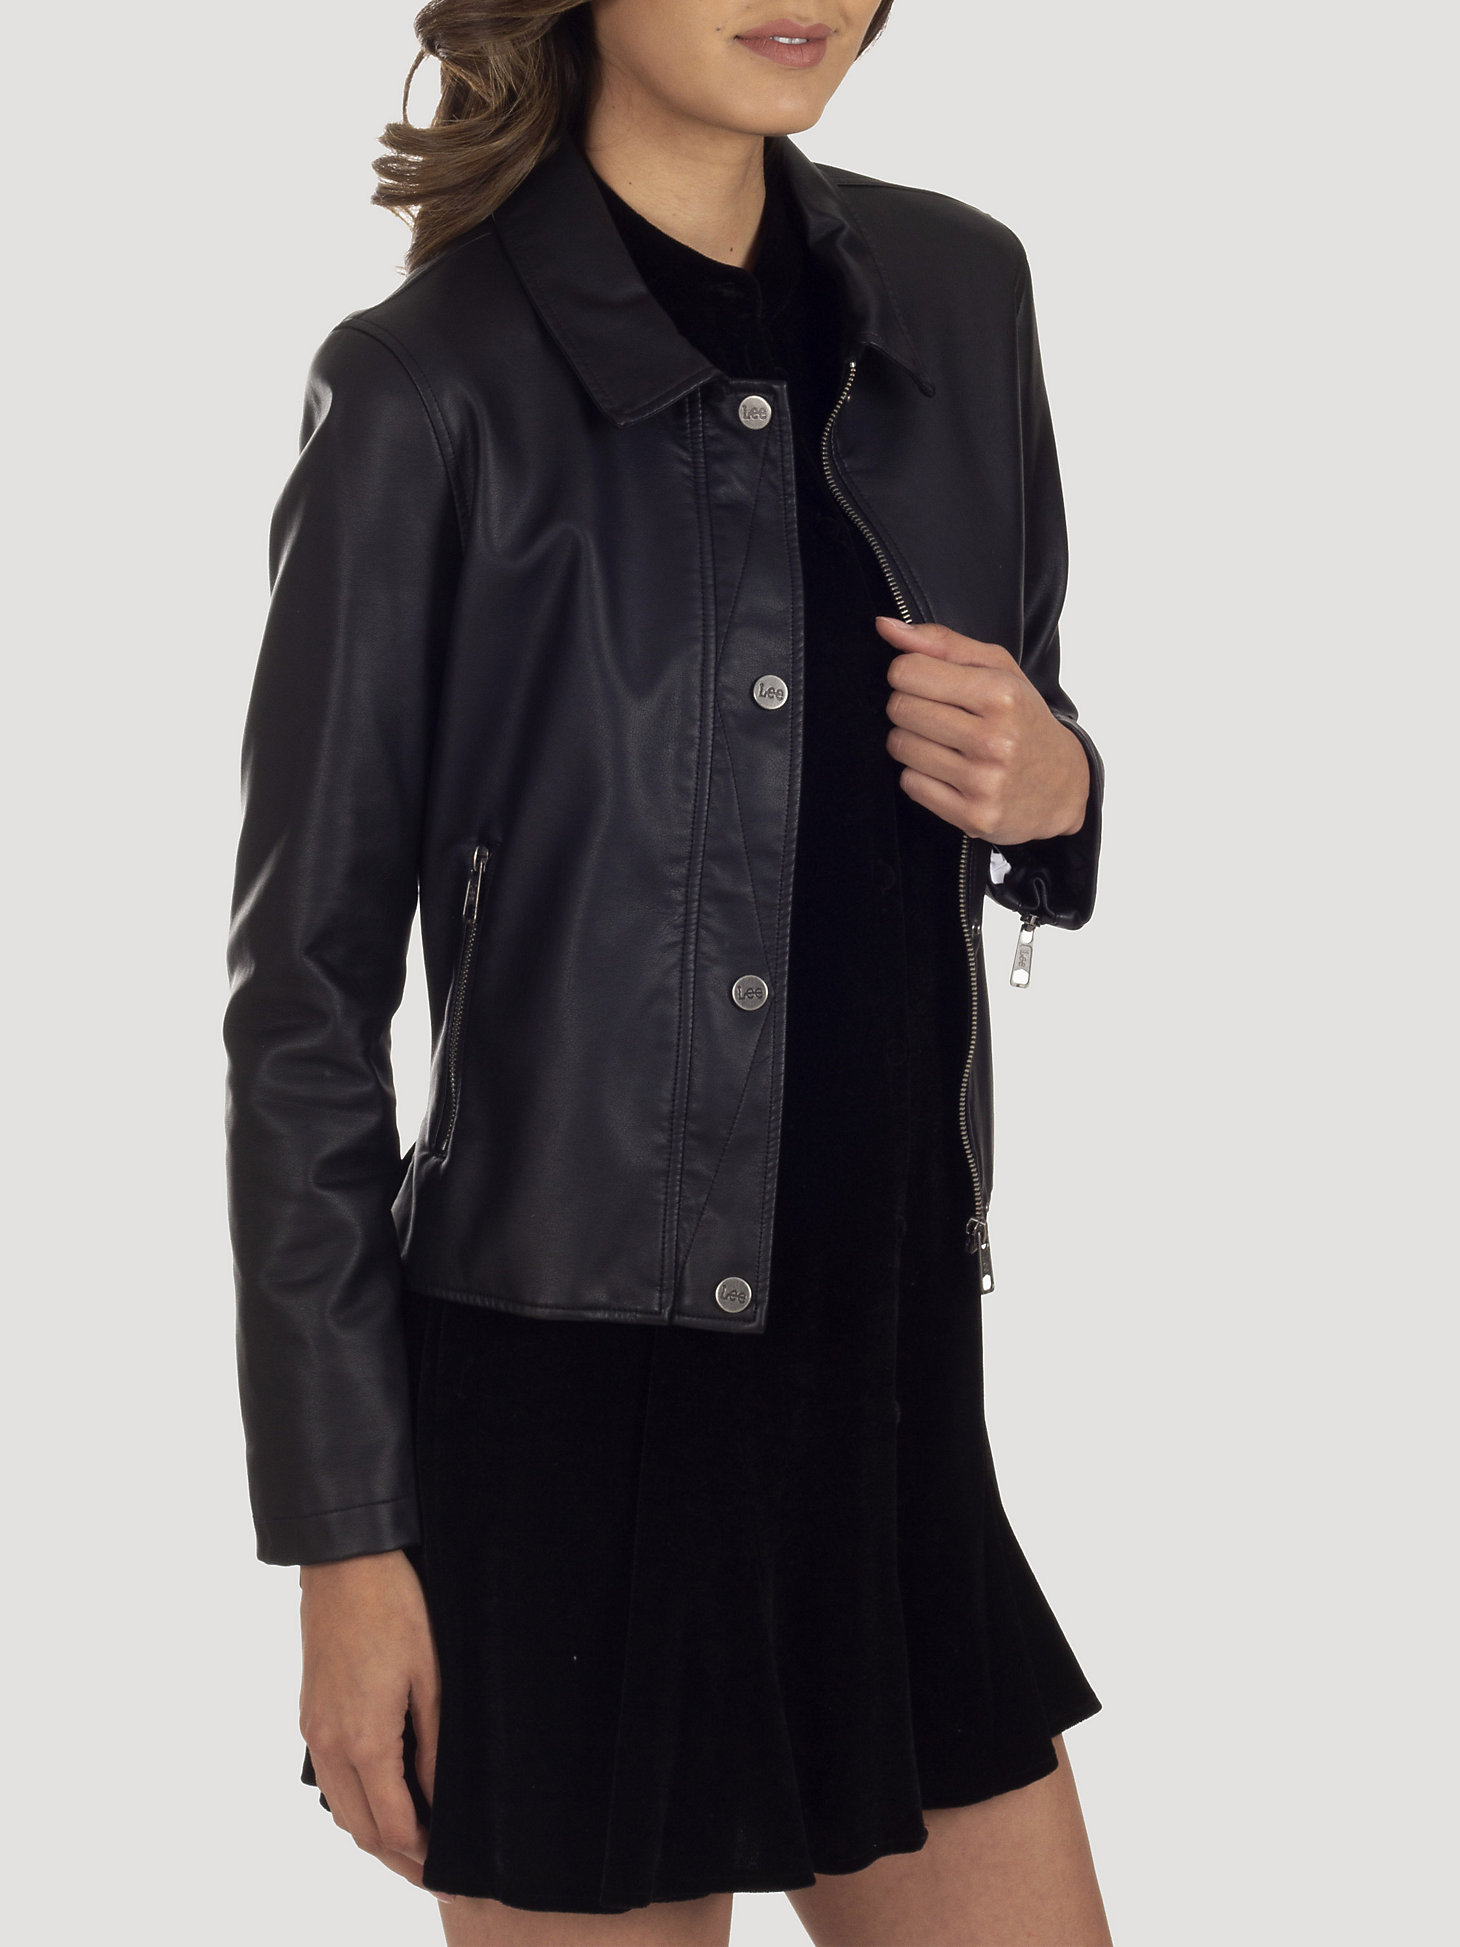 Women's Classic Zip Up Faux Leather Jacket in Black alternative view 2